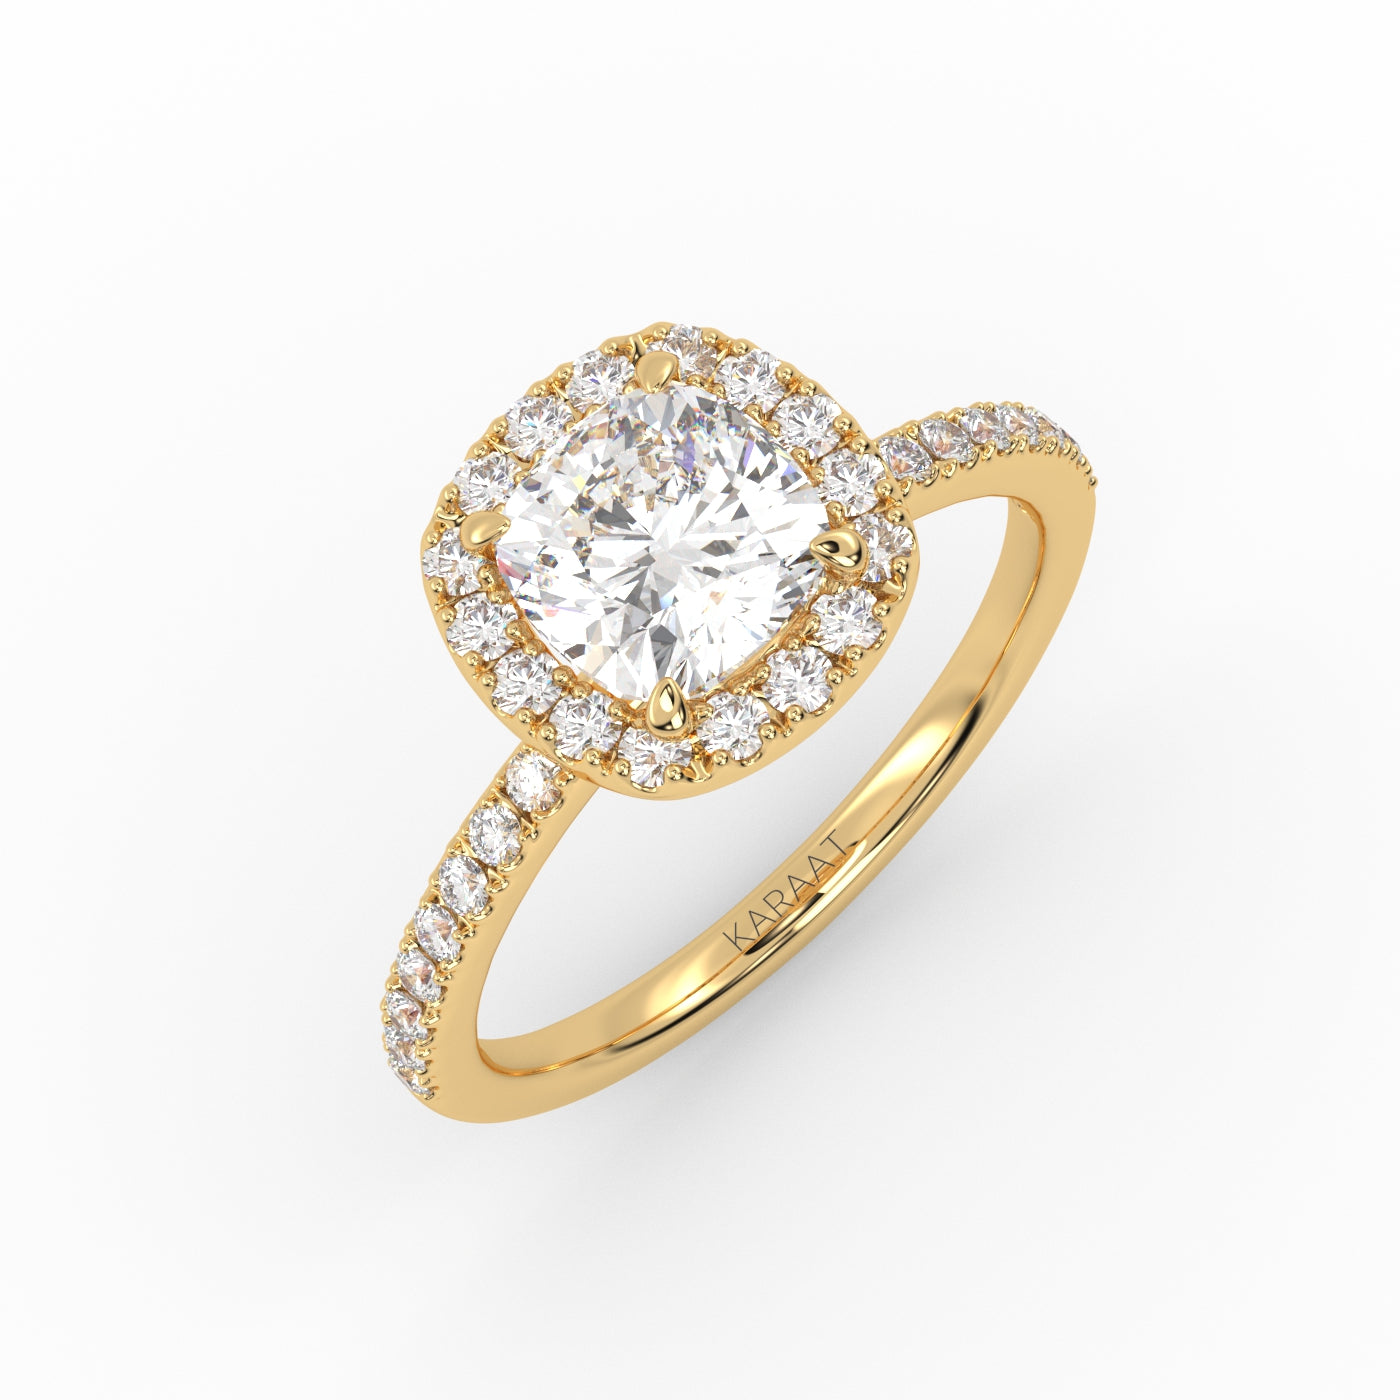 A cushion solitaire diamond ring with Pavé band and Halo design that highlight the beauty of the center stone. 